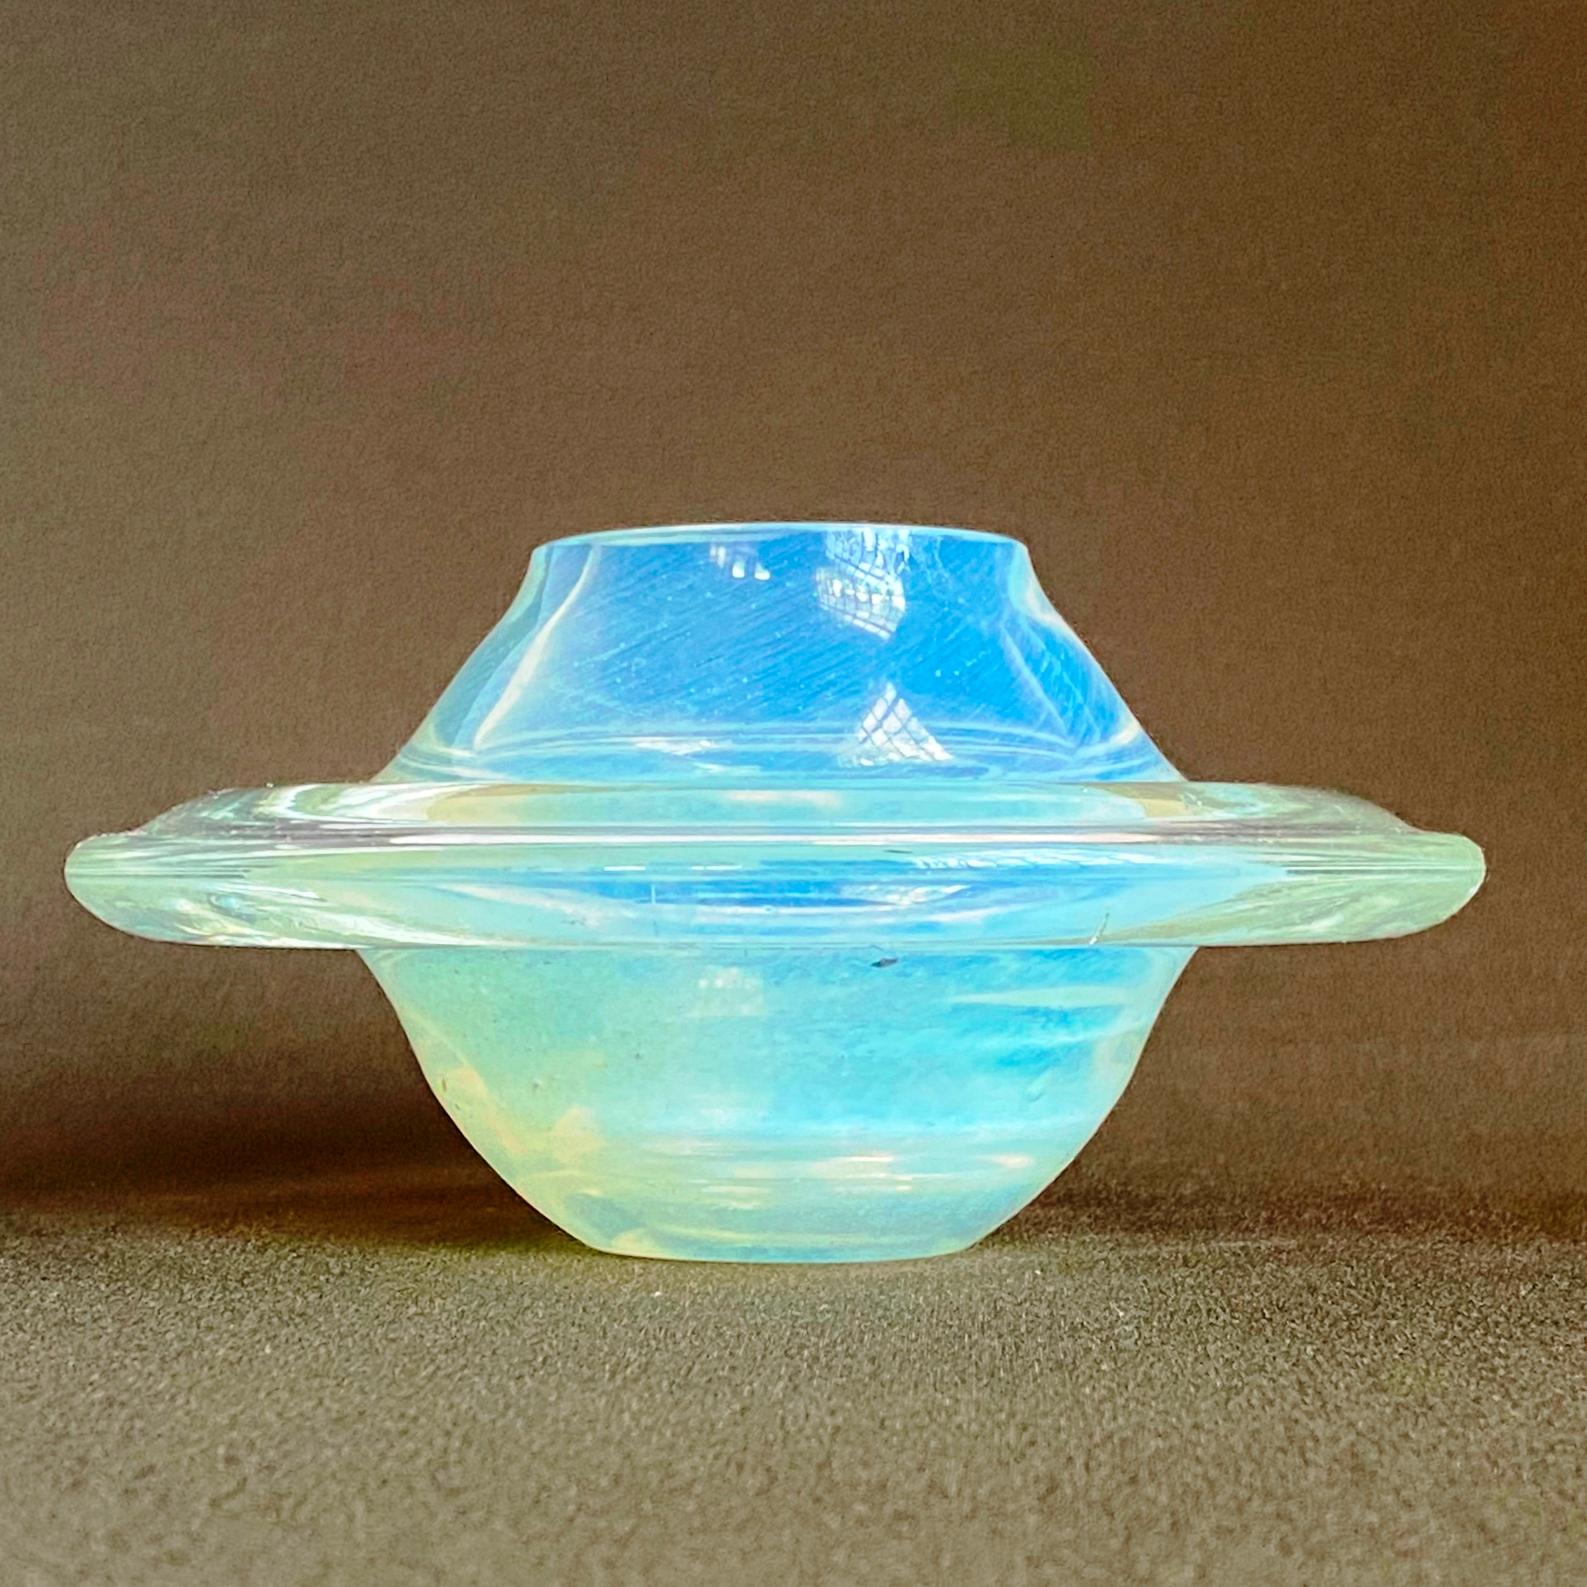 Hand-Crafted Opalescent Murano Glass Saturn Shaped Planet Paperweight or Bowl, Italy 1960s For Sale